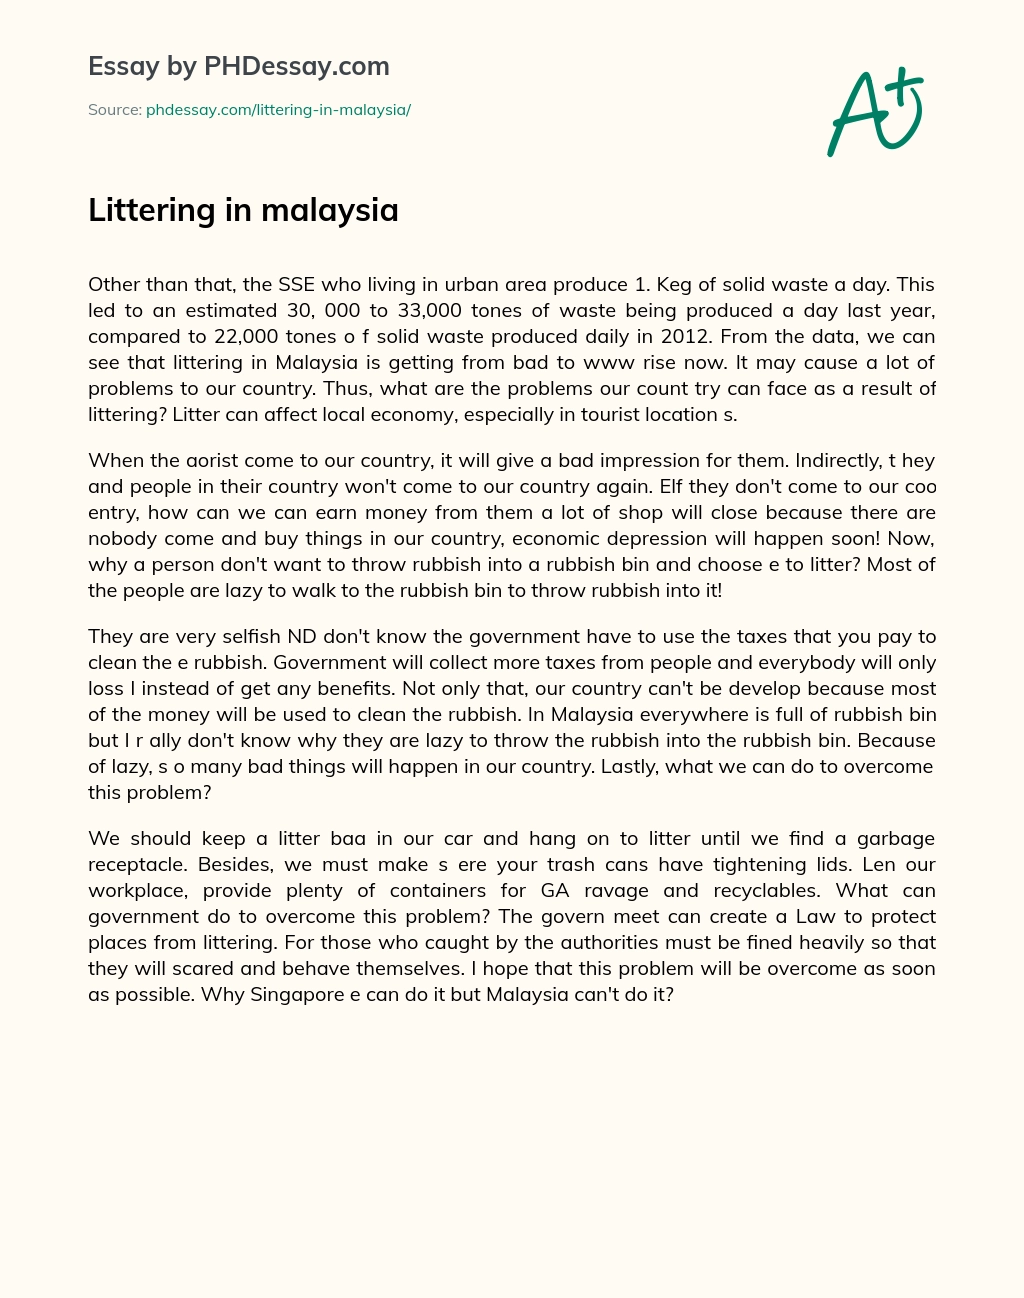 Littering in malaysia essay